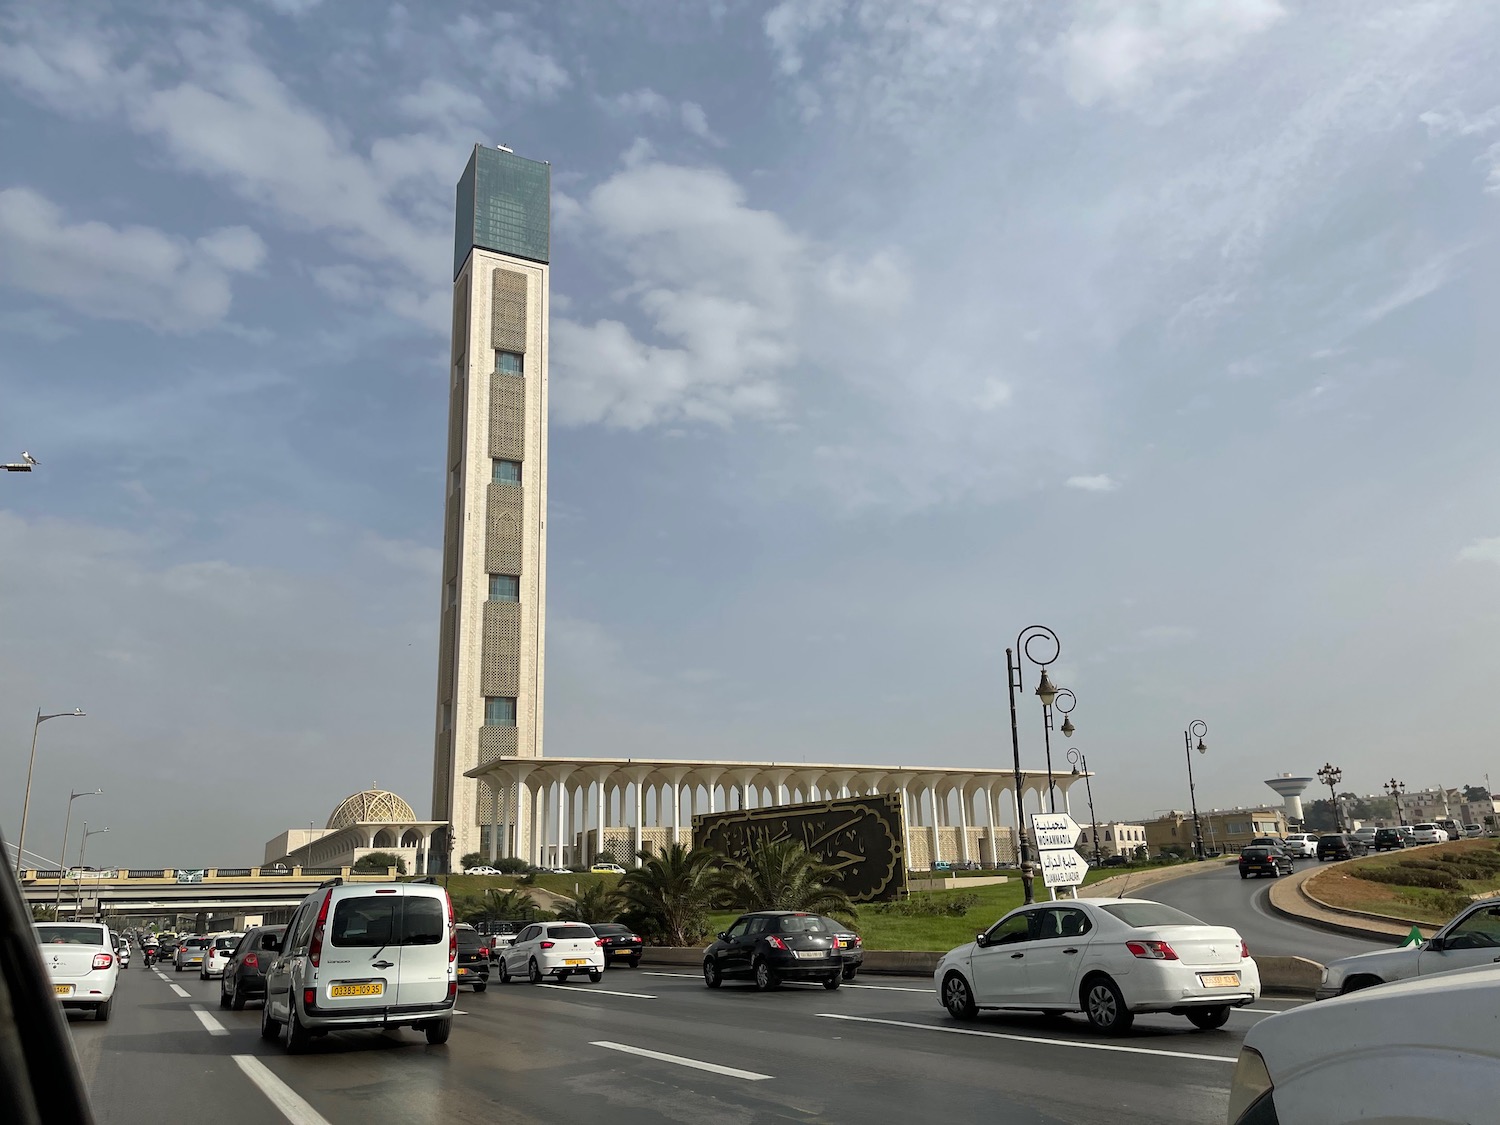 a tall tower with columns and columns on a road with cars